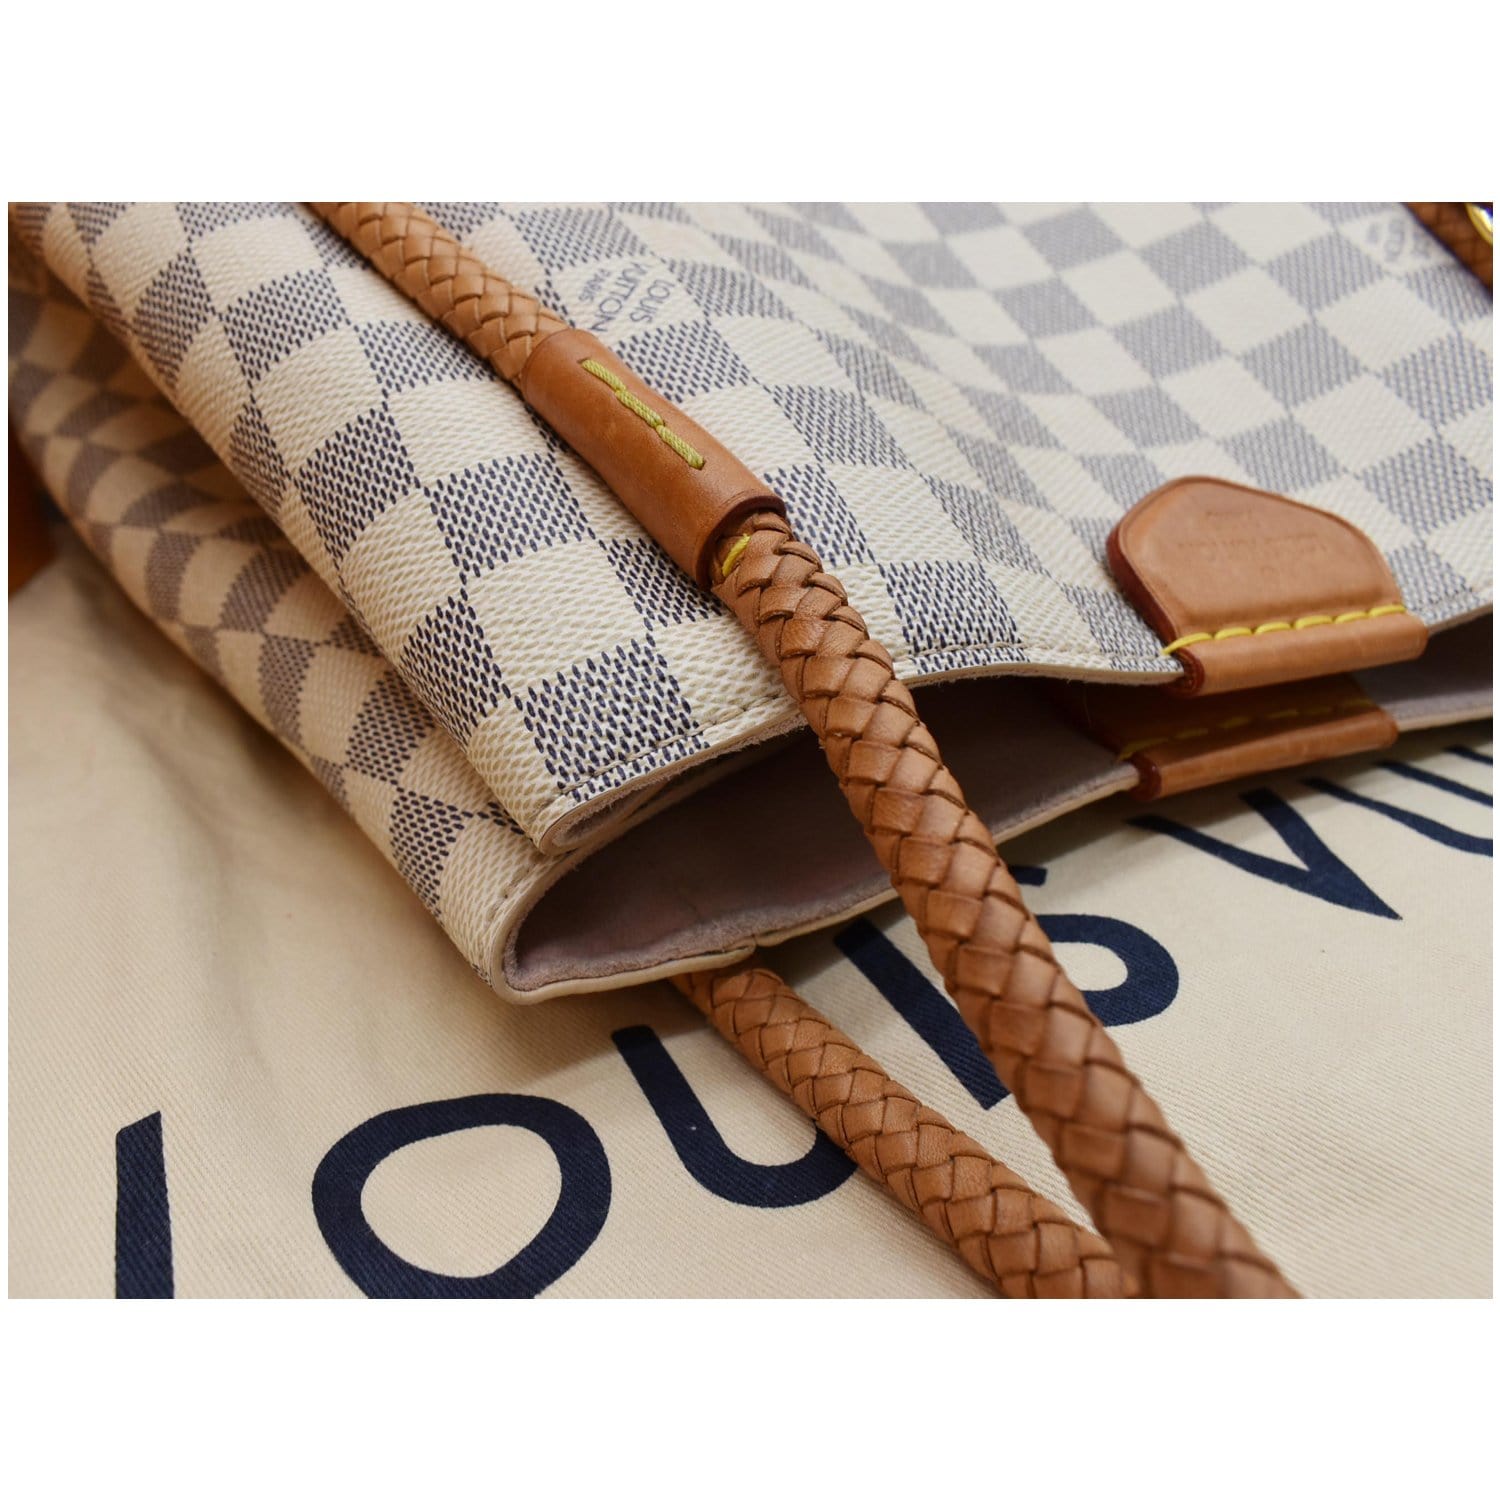 Louis Vuitton Propriano - For Sale on 1stDibs  lv propriano, louis vuitton  damier azur propriano, louis vuitton propriano price